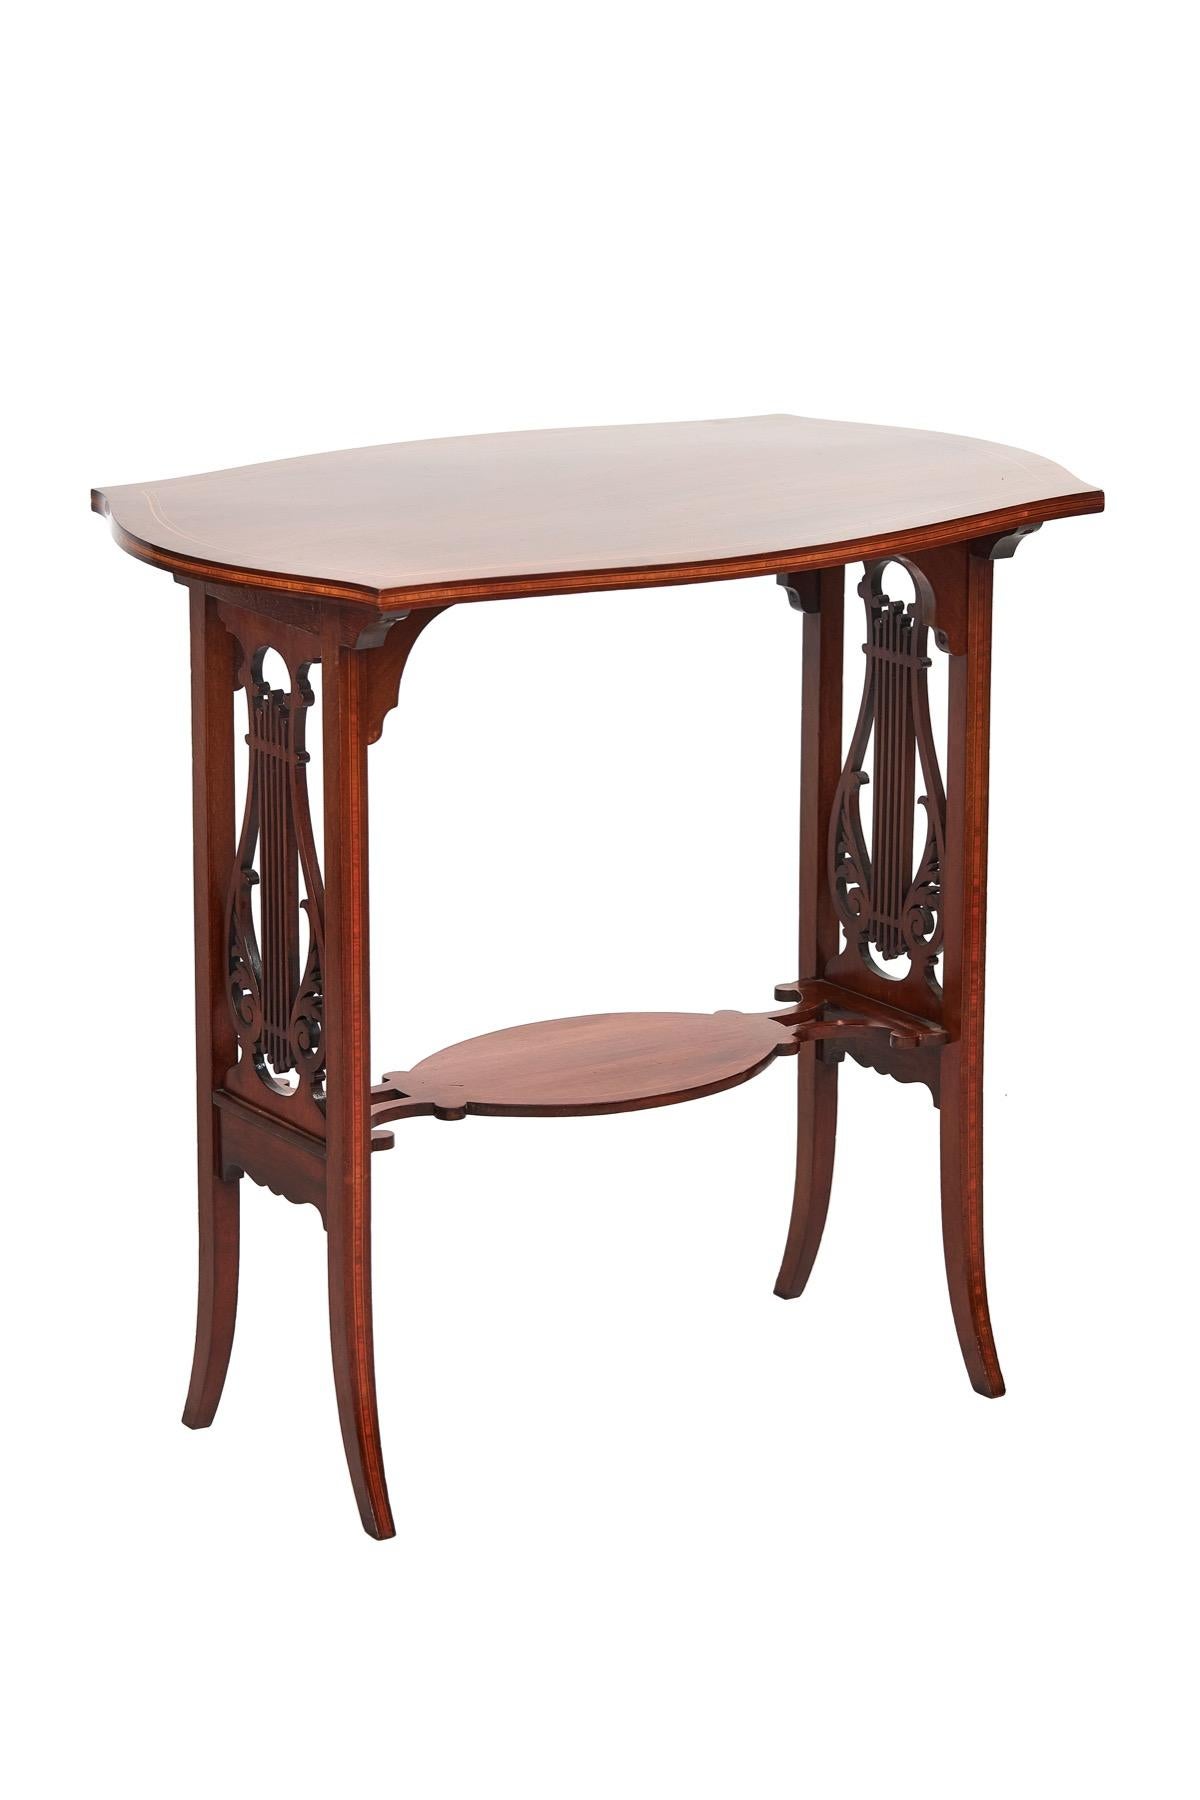 English Fine Sheraton Revival Mahogany Inlaid & carved Lyre end support table[B] For Sale